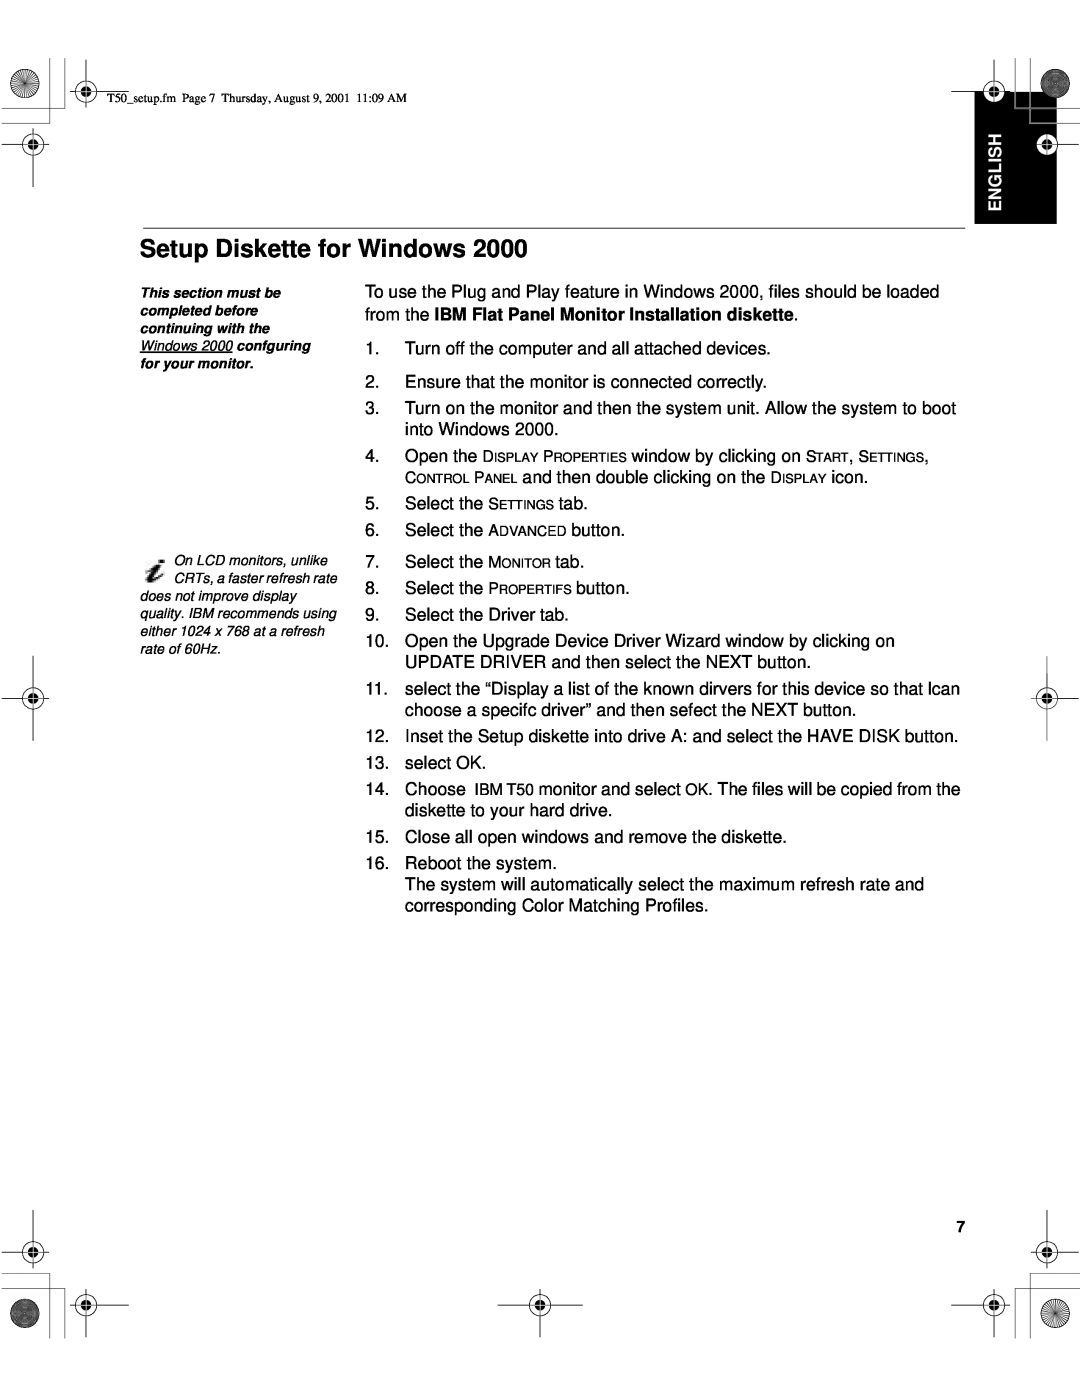 IBM 9511-AGC, T50, 9511-AWC manual Setup Diskette for Windows, English, from the IBM Flat Panel Monitor Installation diskette 